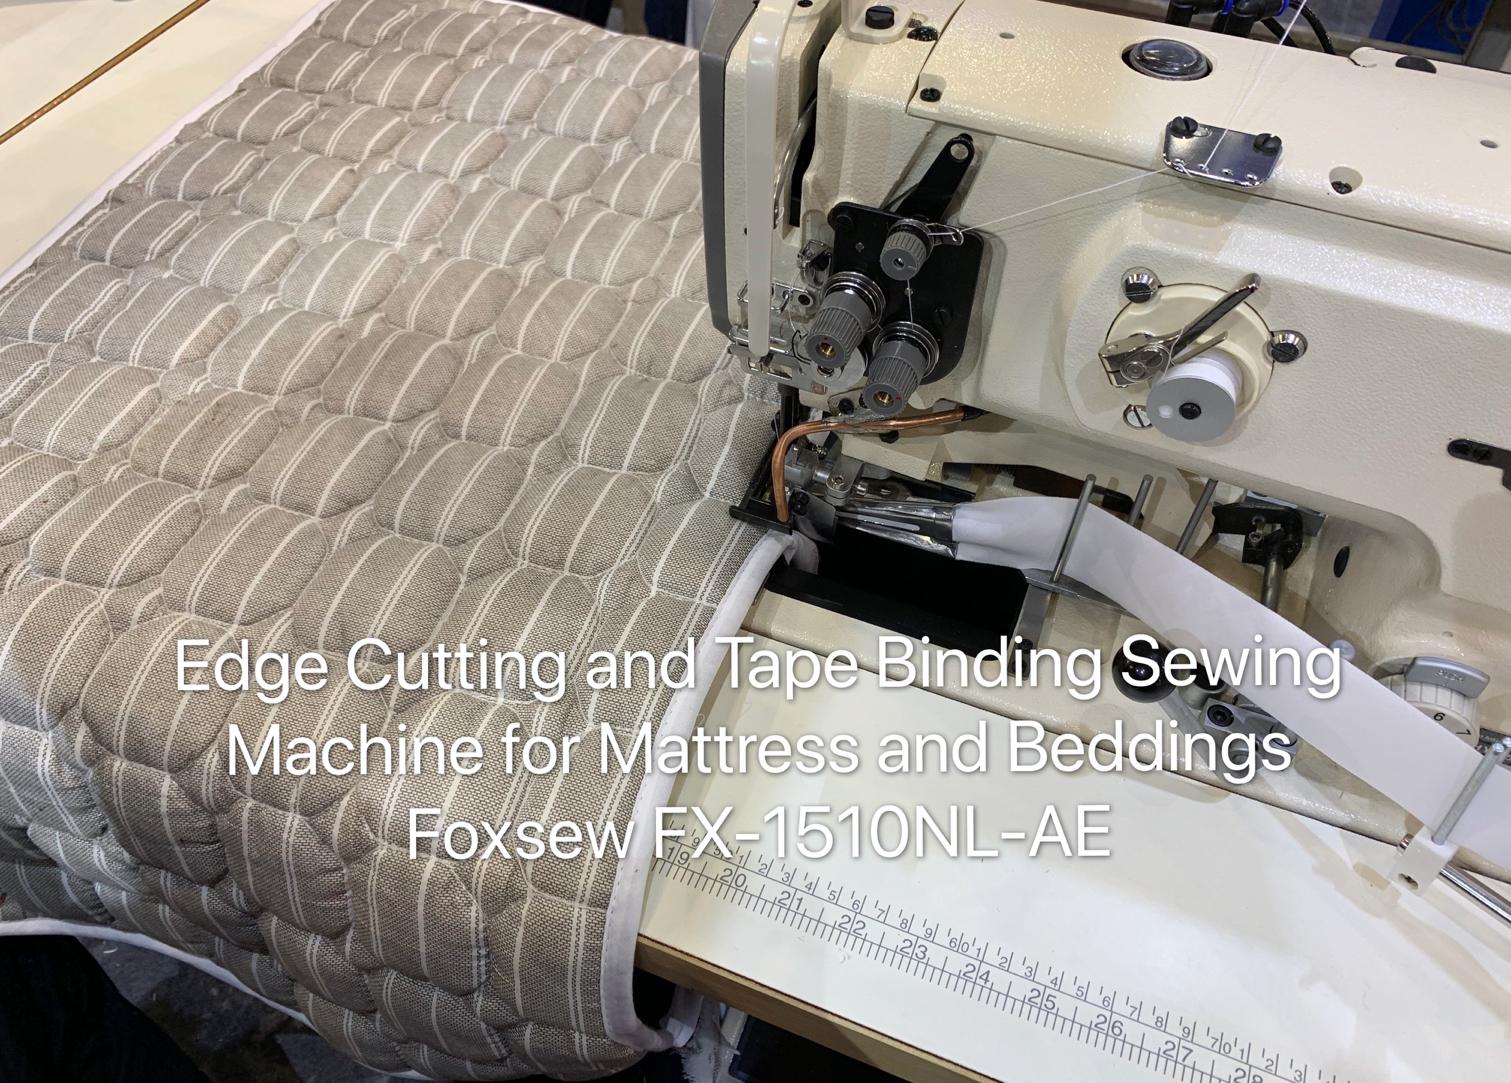 Heavy Duty Tape Binding Sewing Machines for Mattress, Quilts, Duvets, Comforters,FOXSEW FX-1510NL-AE -7